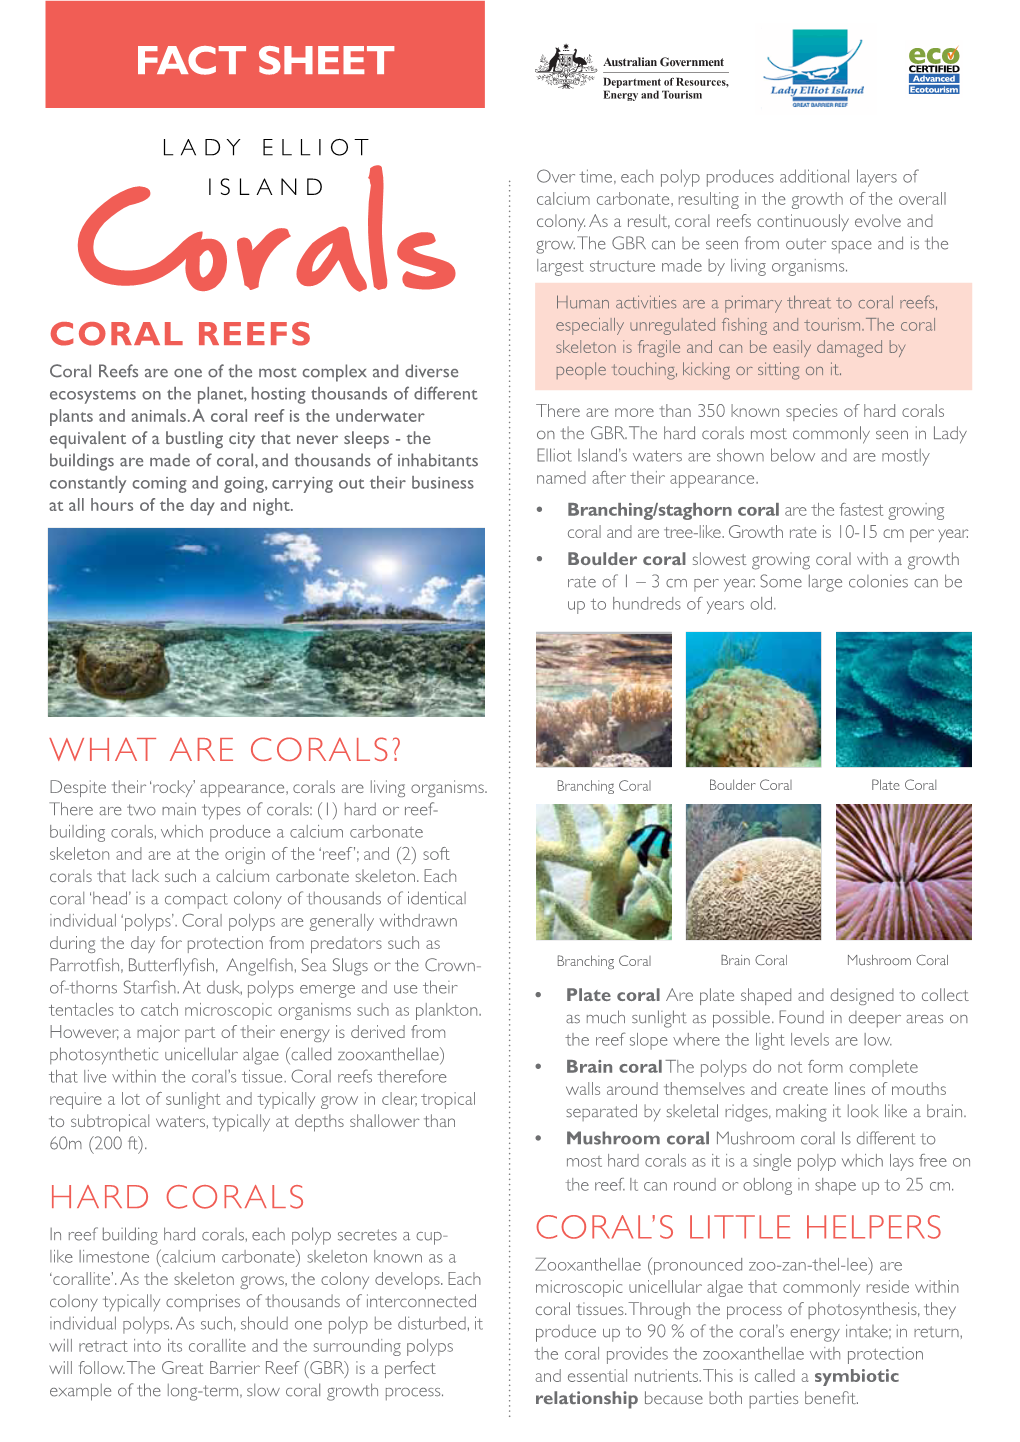 Corals Especially Unregulated Fishing and Tourism